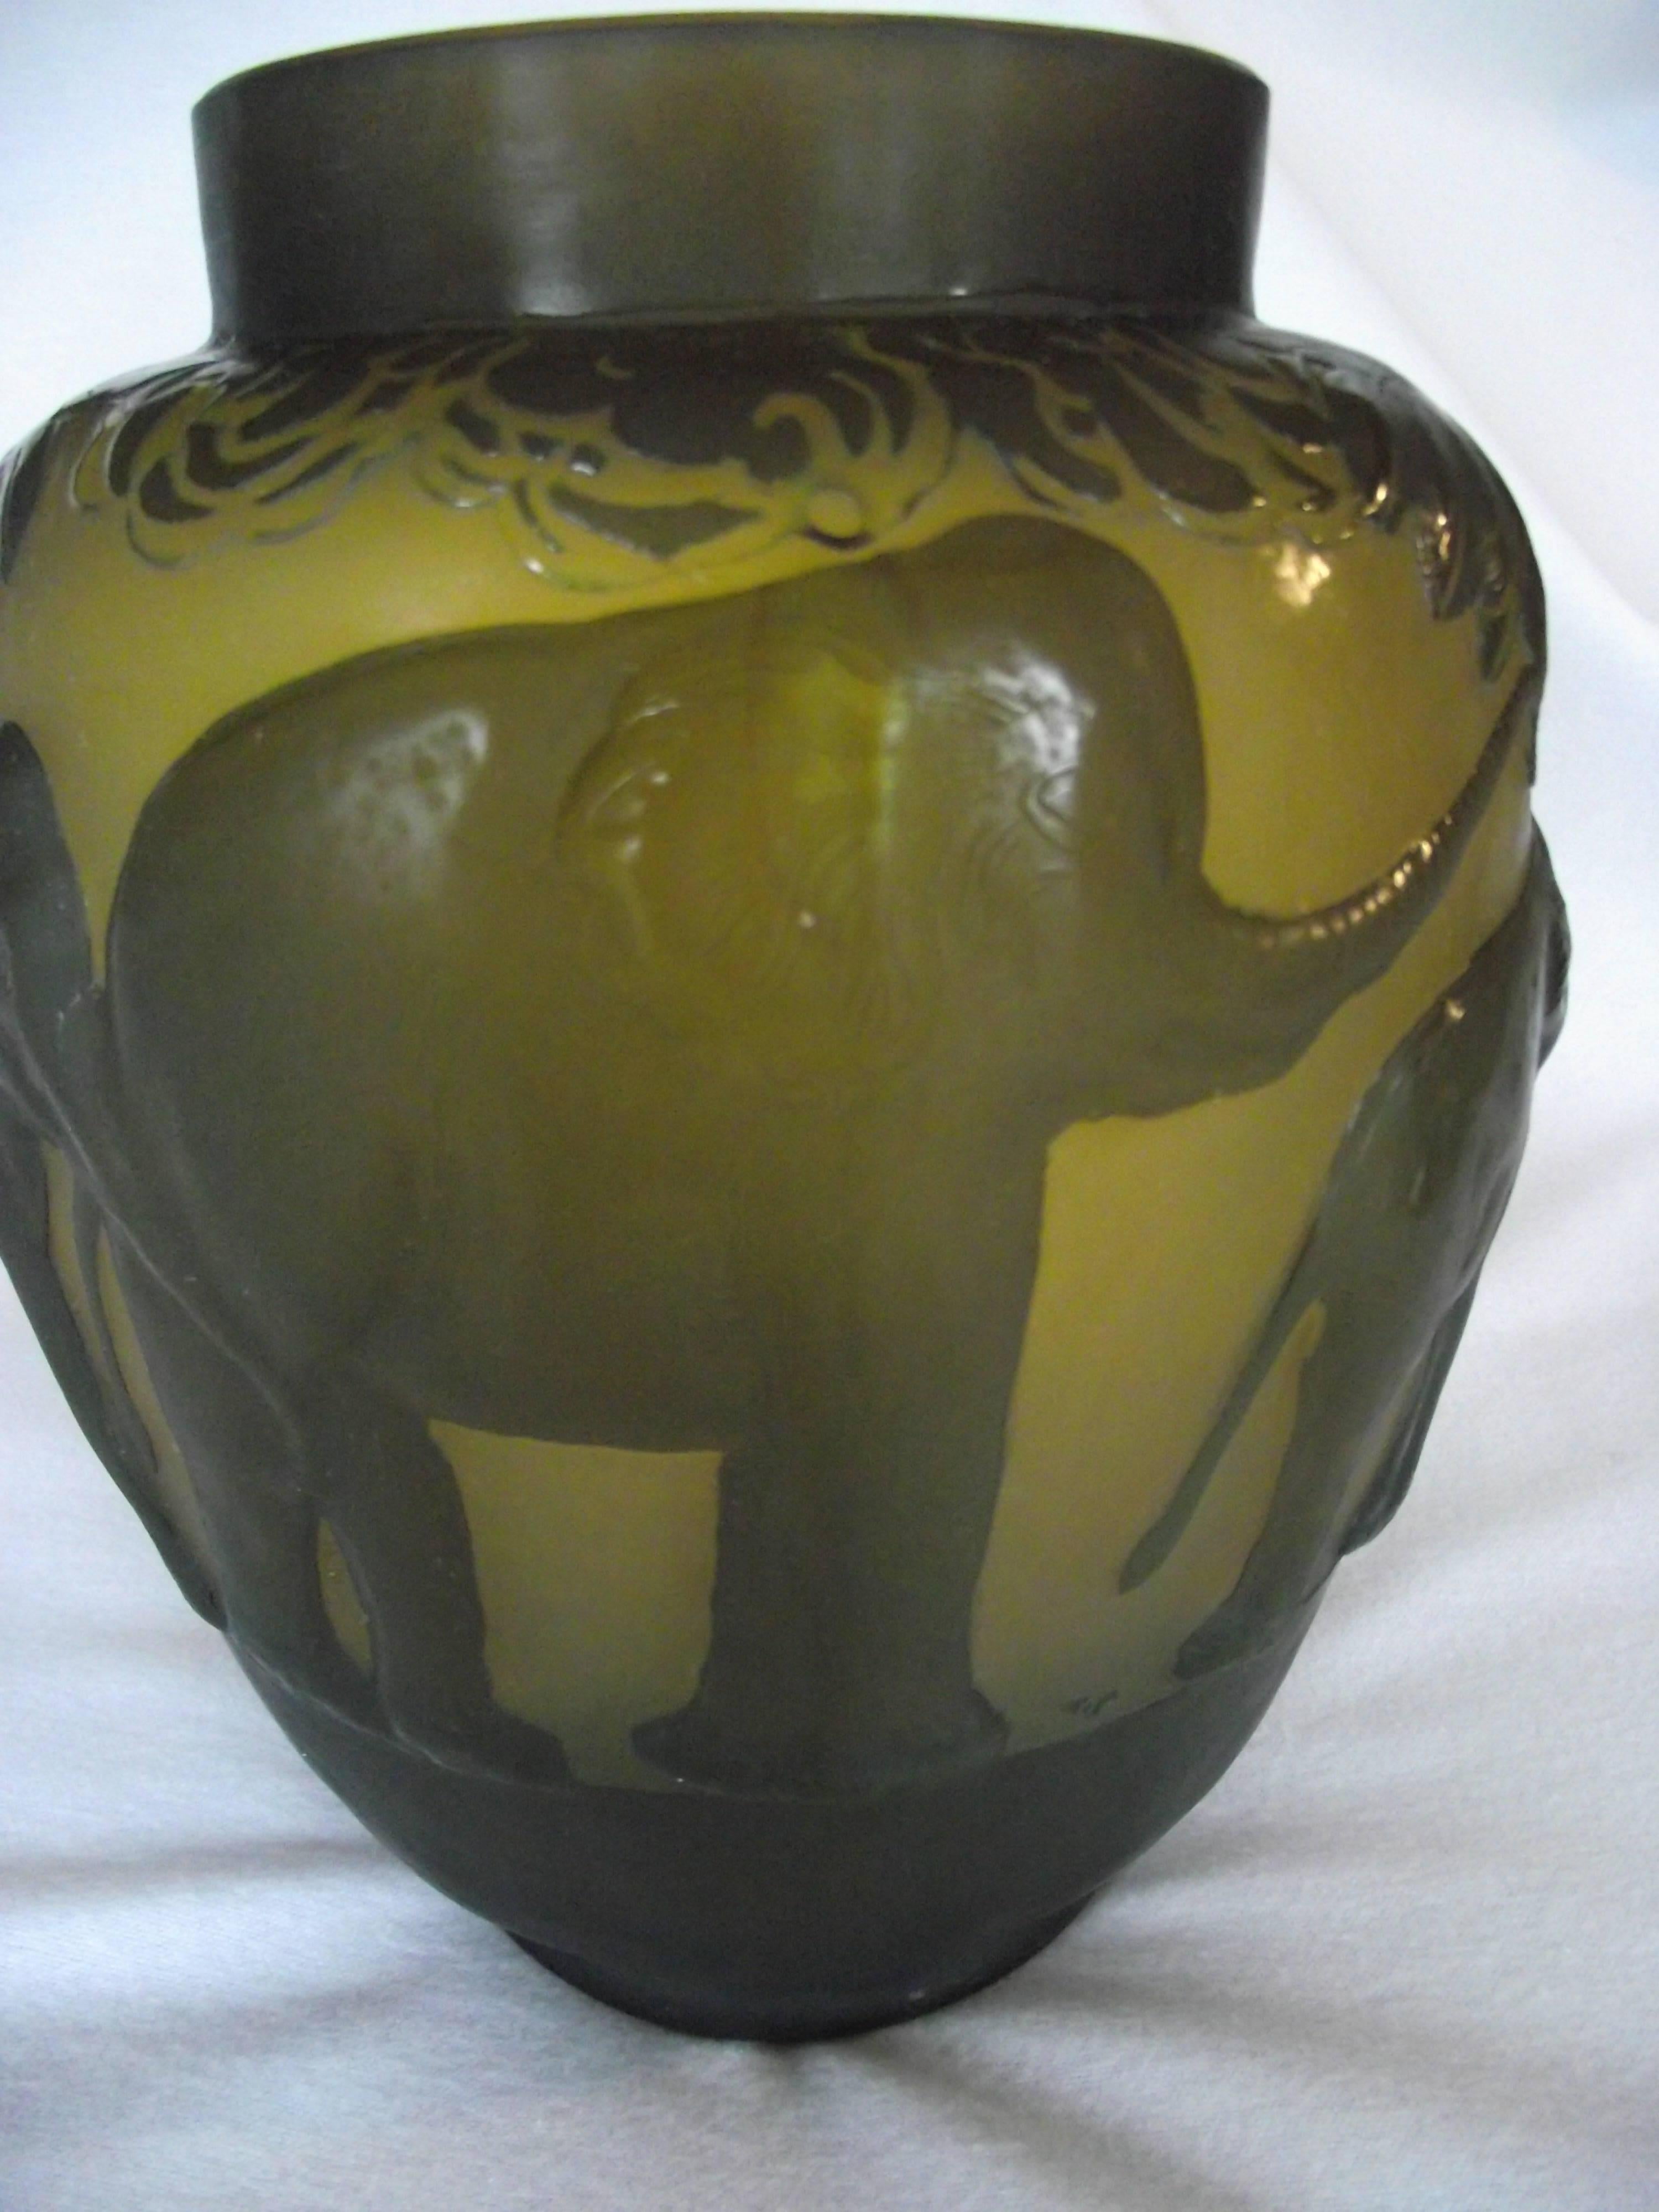 This beautiful signed Galle elephant vase is very impressive. In extremely good condition no chips or scratches. I have also included pictures looking to the inside of the vase. As you can see the images have not been ground out on the inside.